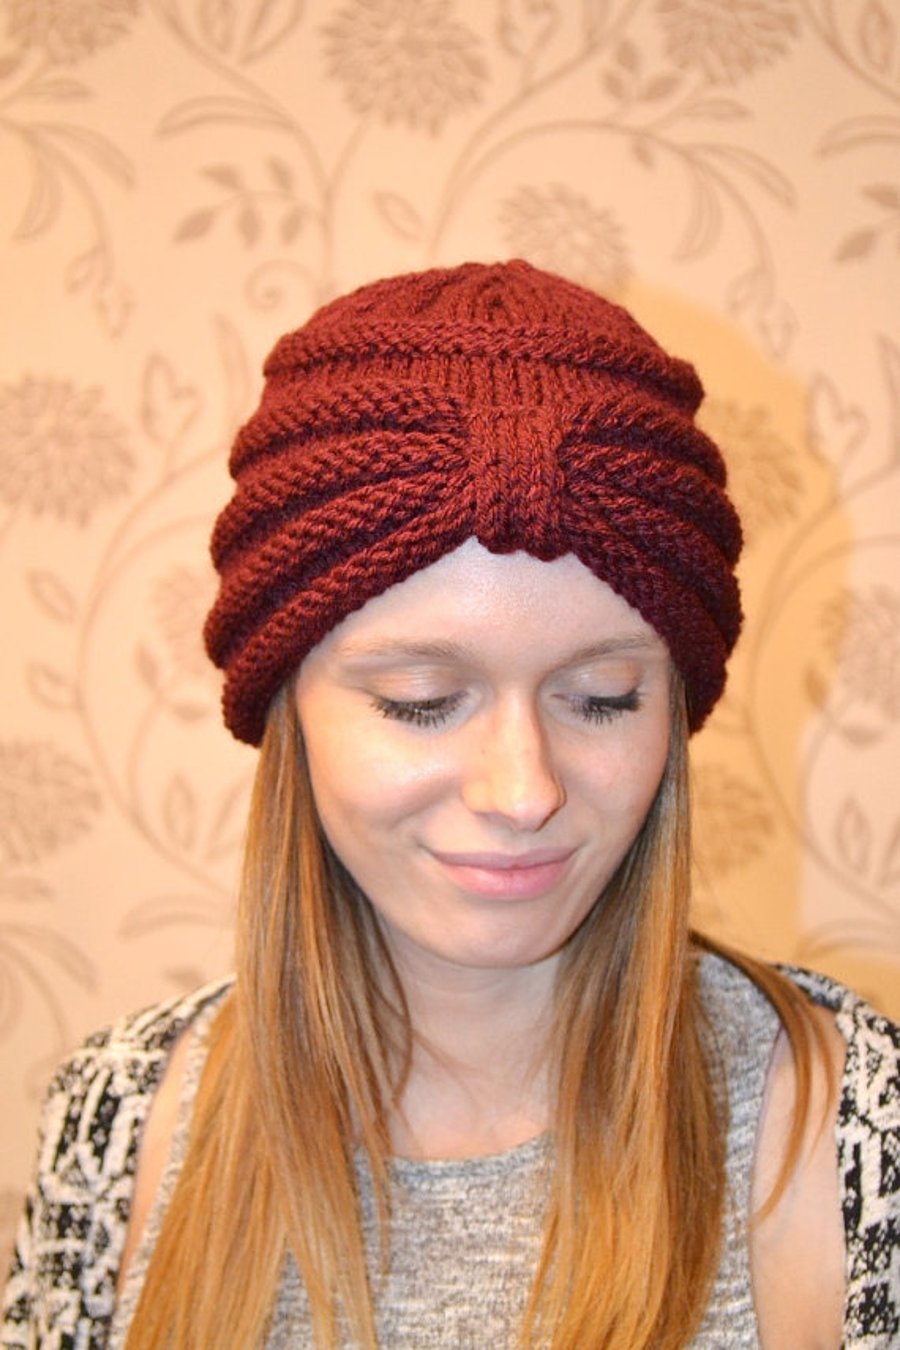 Turban style beanie hat knitted in burgundy 